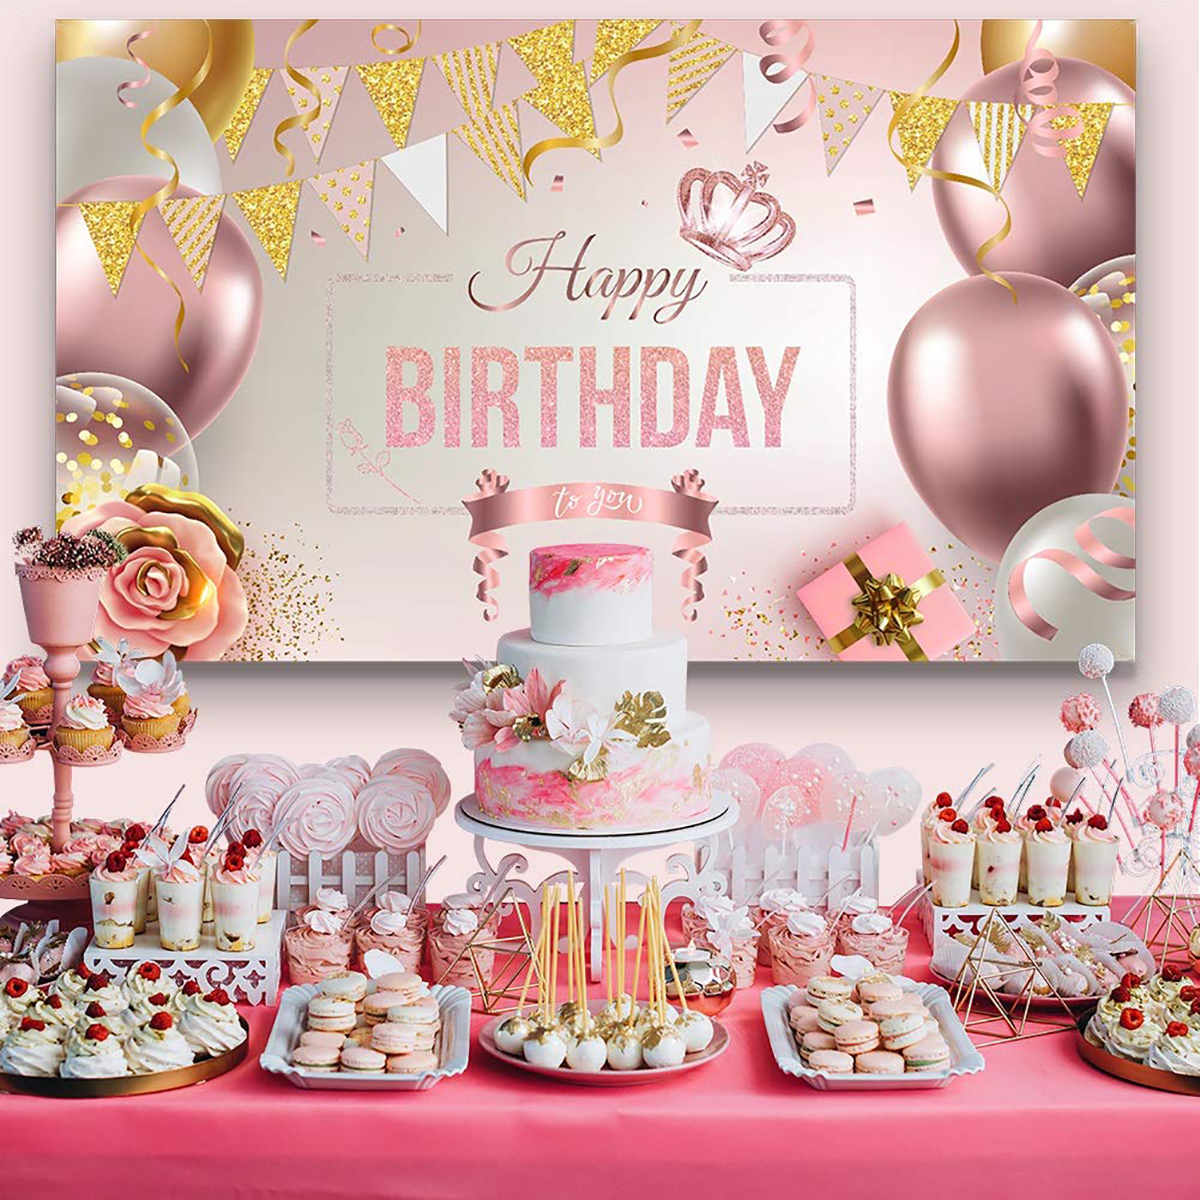 Happy-Birthday-Decorations-Banner-Large-Rose-Gold-Balloons-Backdrop-Theme-Poster-1834298-1